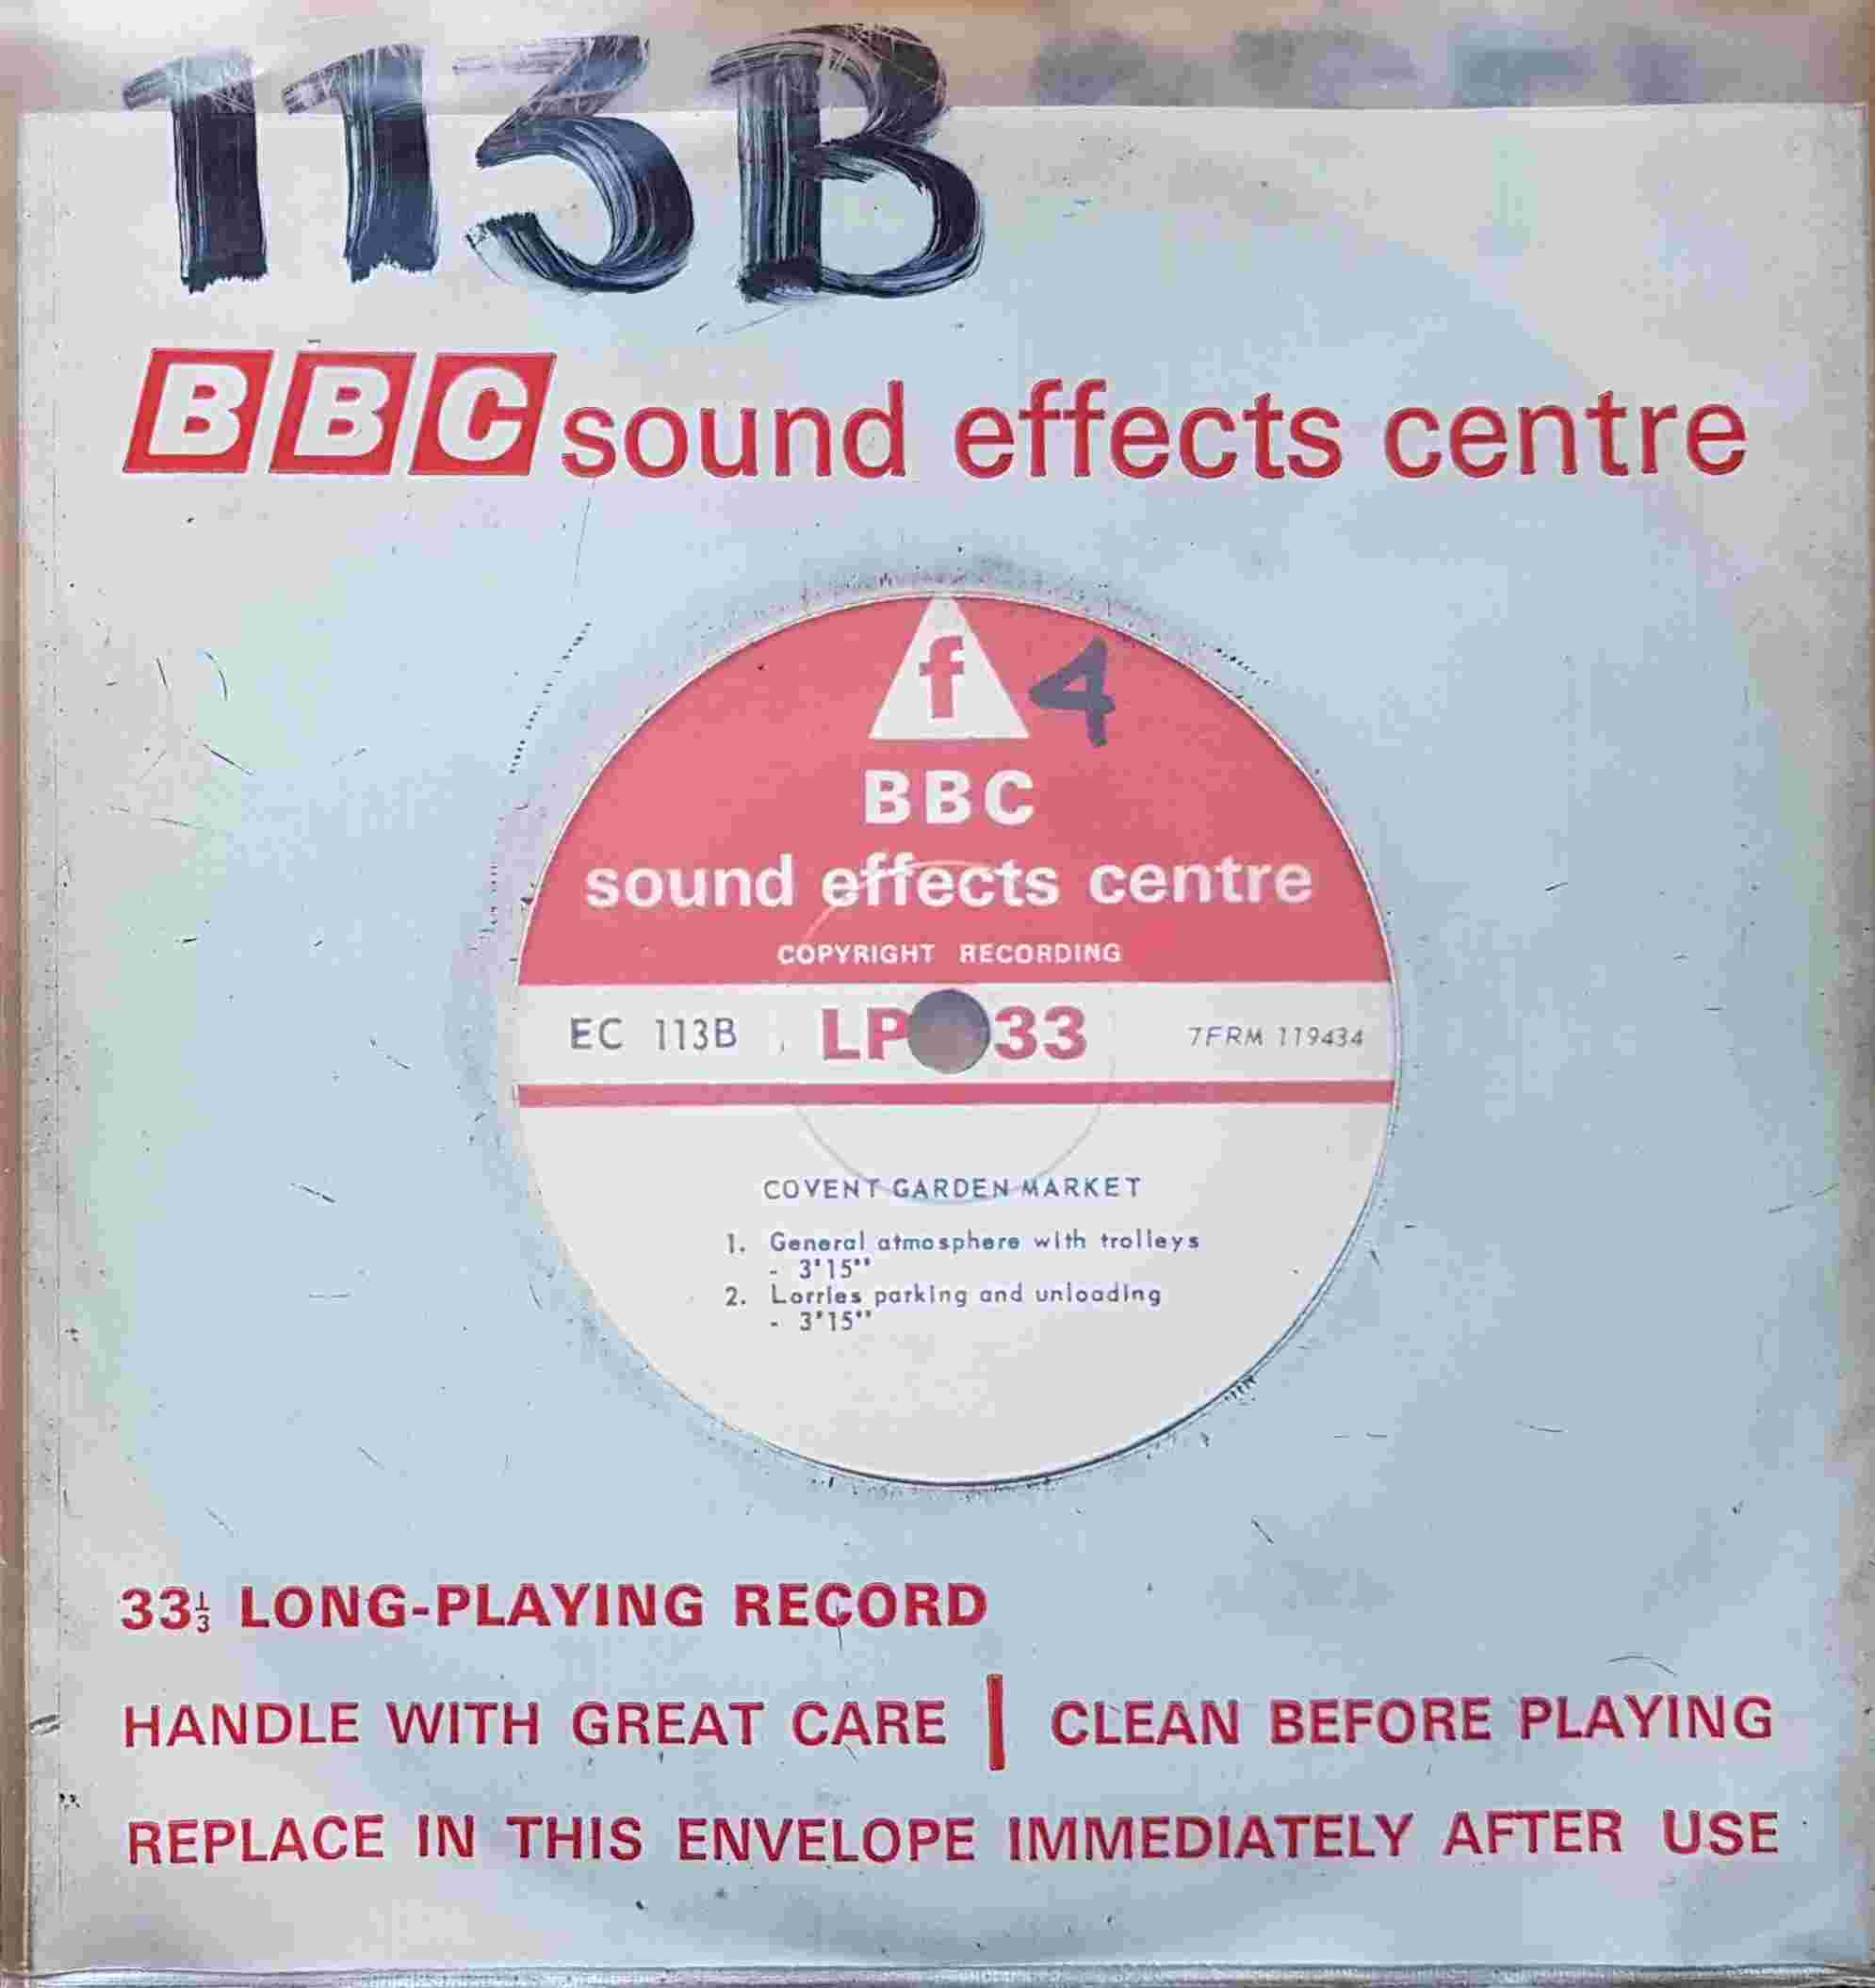 Picture of EC 113B Covent Garden Market / Aylesbury Market by artist Not registered from the BBC singles - Records and Tapes library